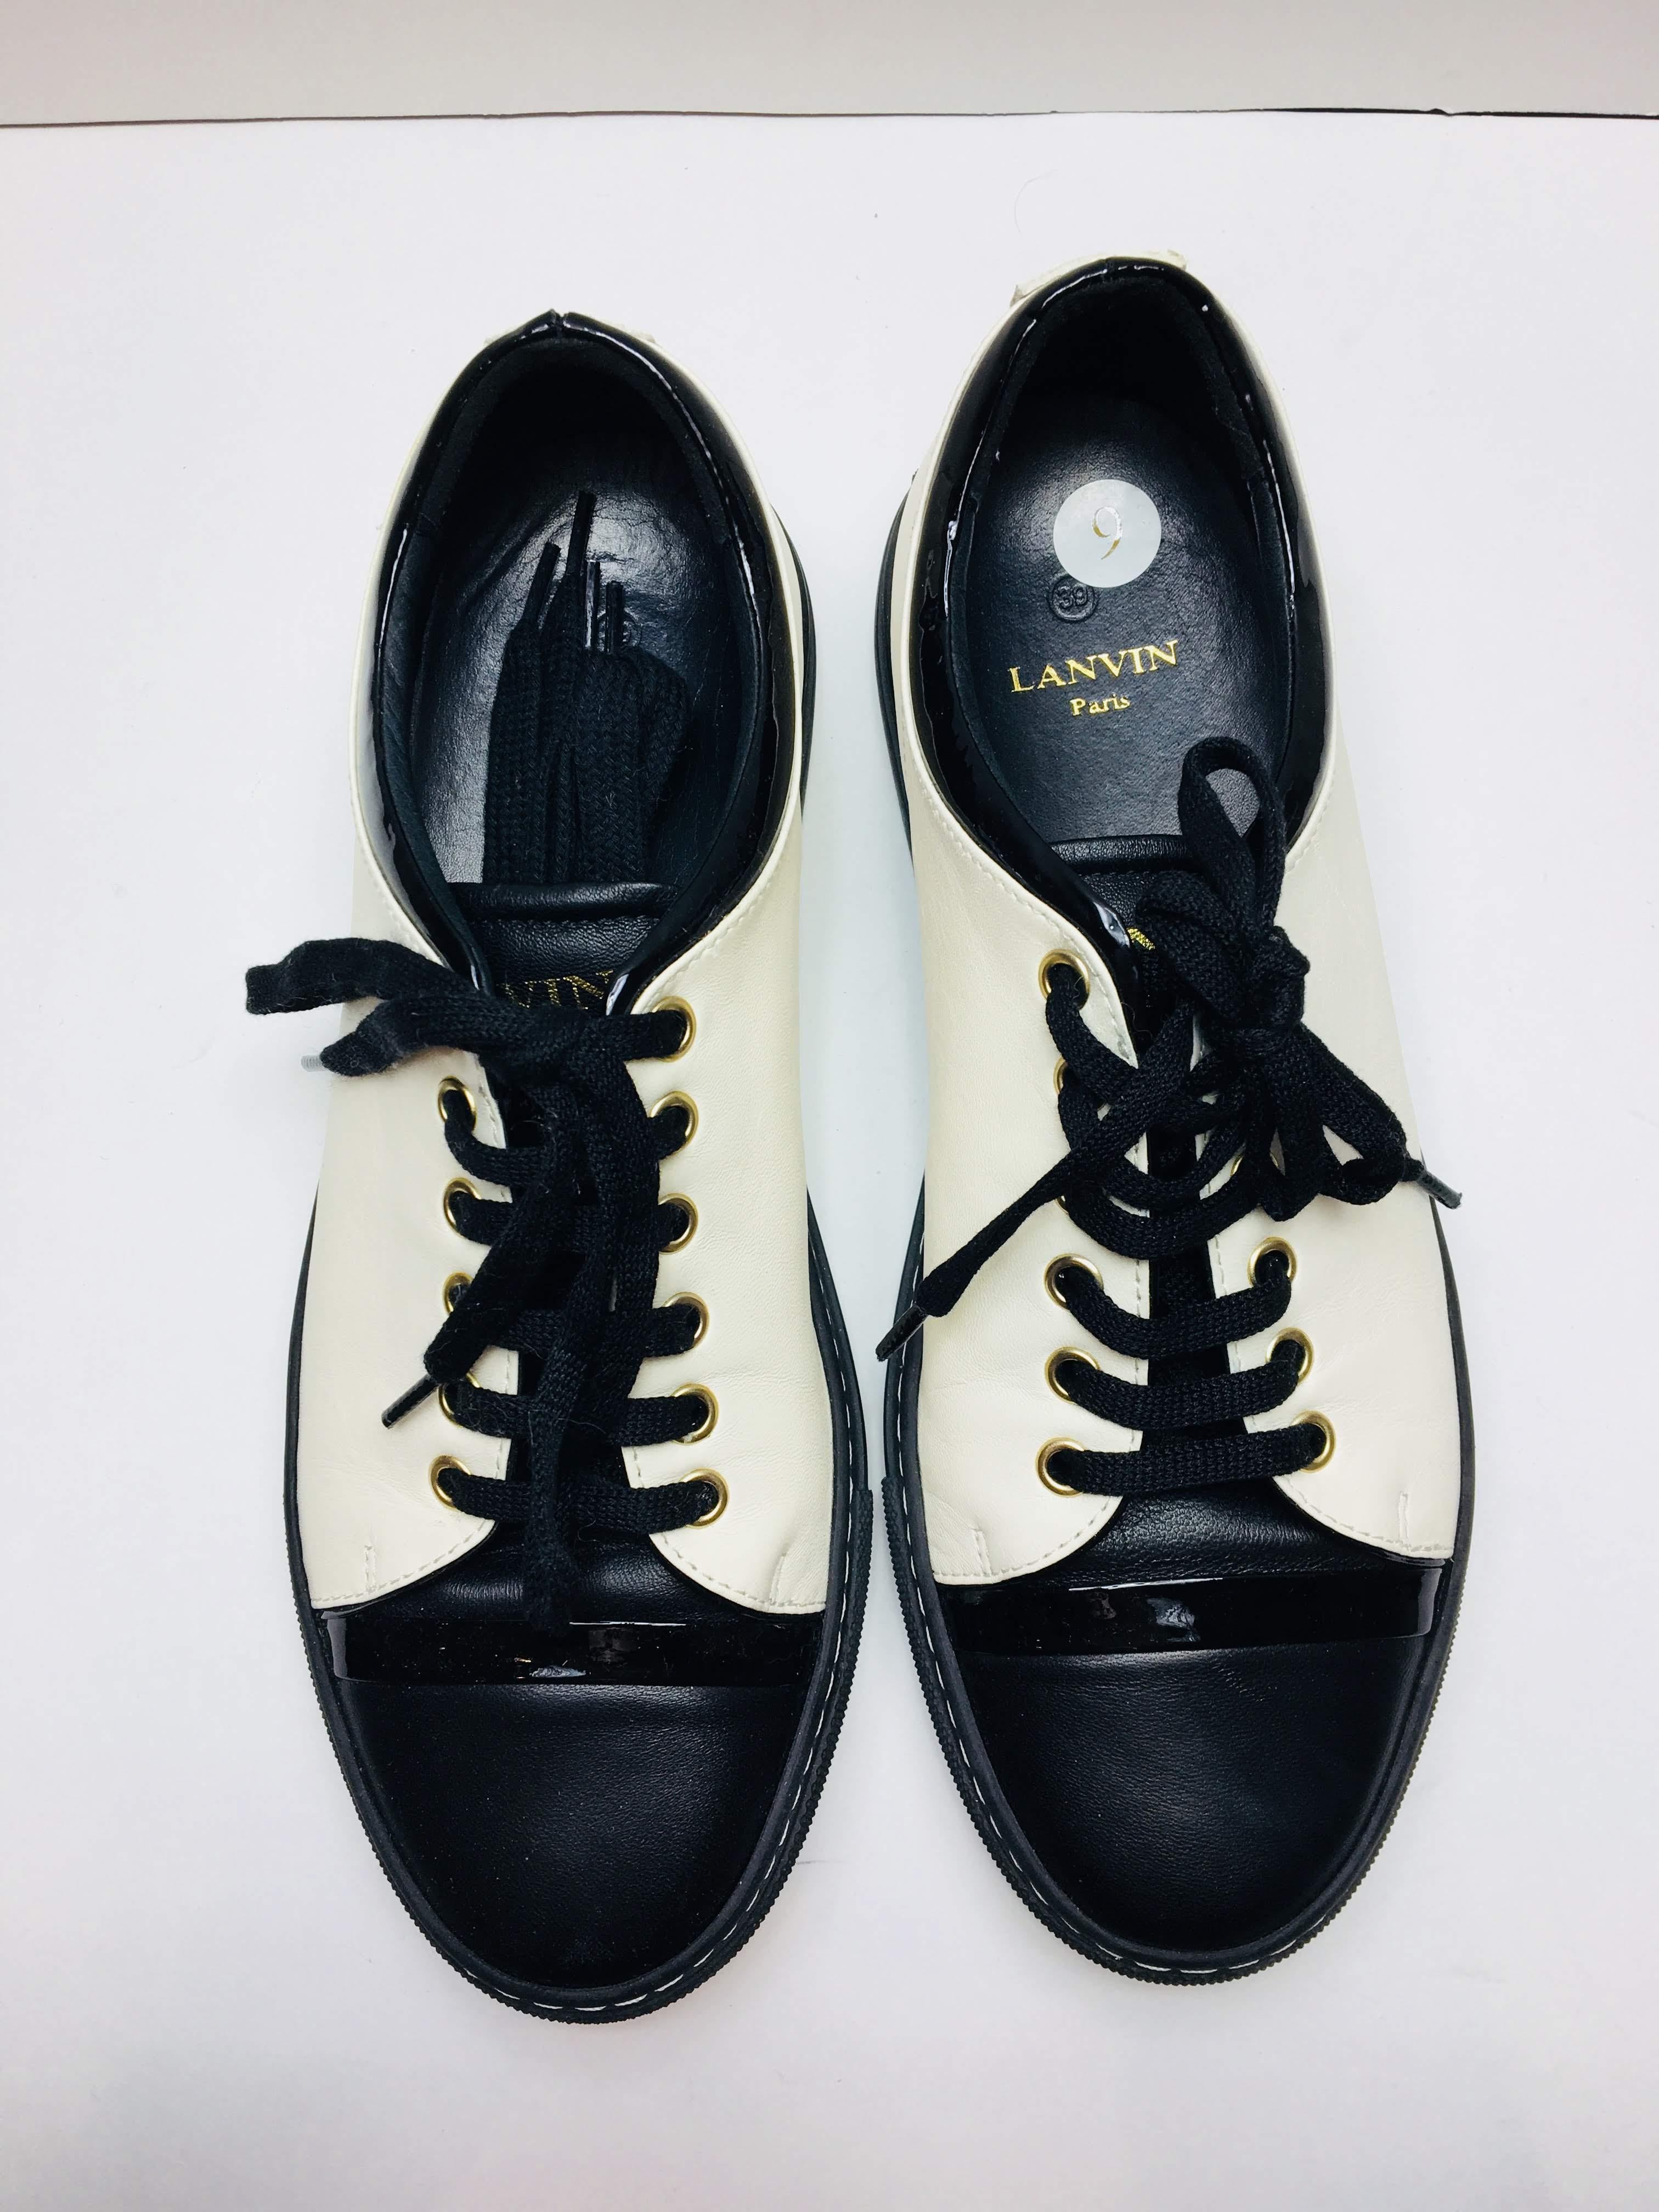 Lanvin Paris  puts an elegant spin on the classic sneaker with this low-top pair ofBlack/Creme Leather with Creme stitching on edges. 
Slightly Worn.
Size 39
 Made in France 
upper: lamb leather, calf leather
lining: leather
sole: leather insole,